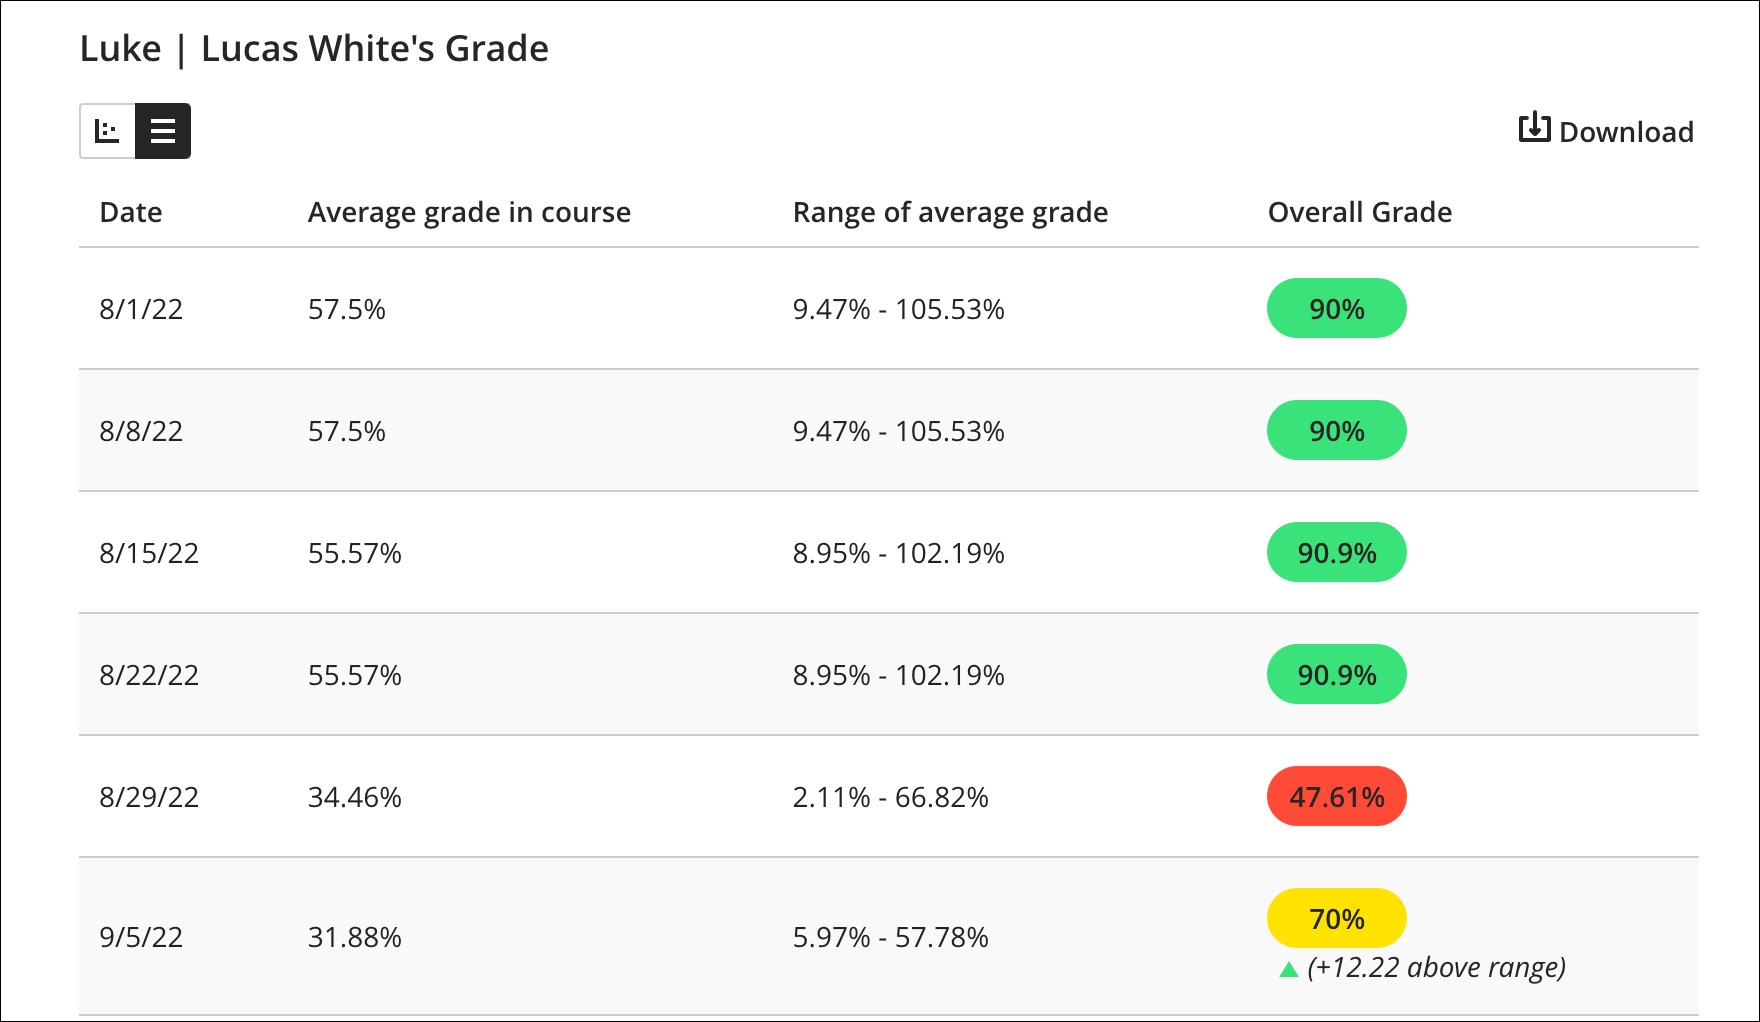 The table view of a student's grade details, showing date, average grade in course, range of average grade, and the student's grade